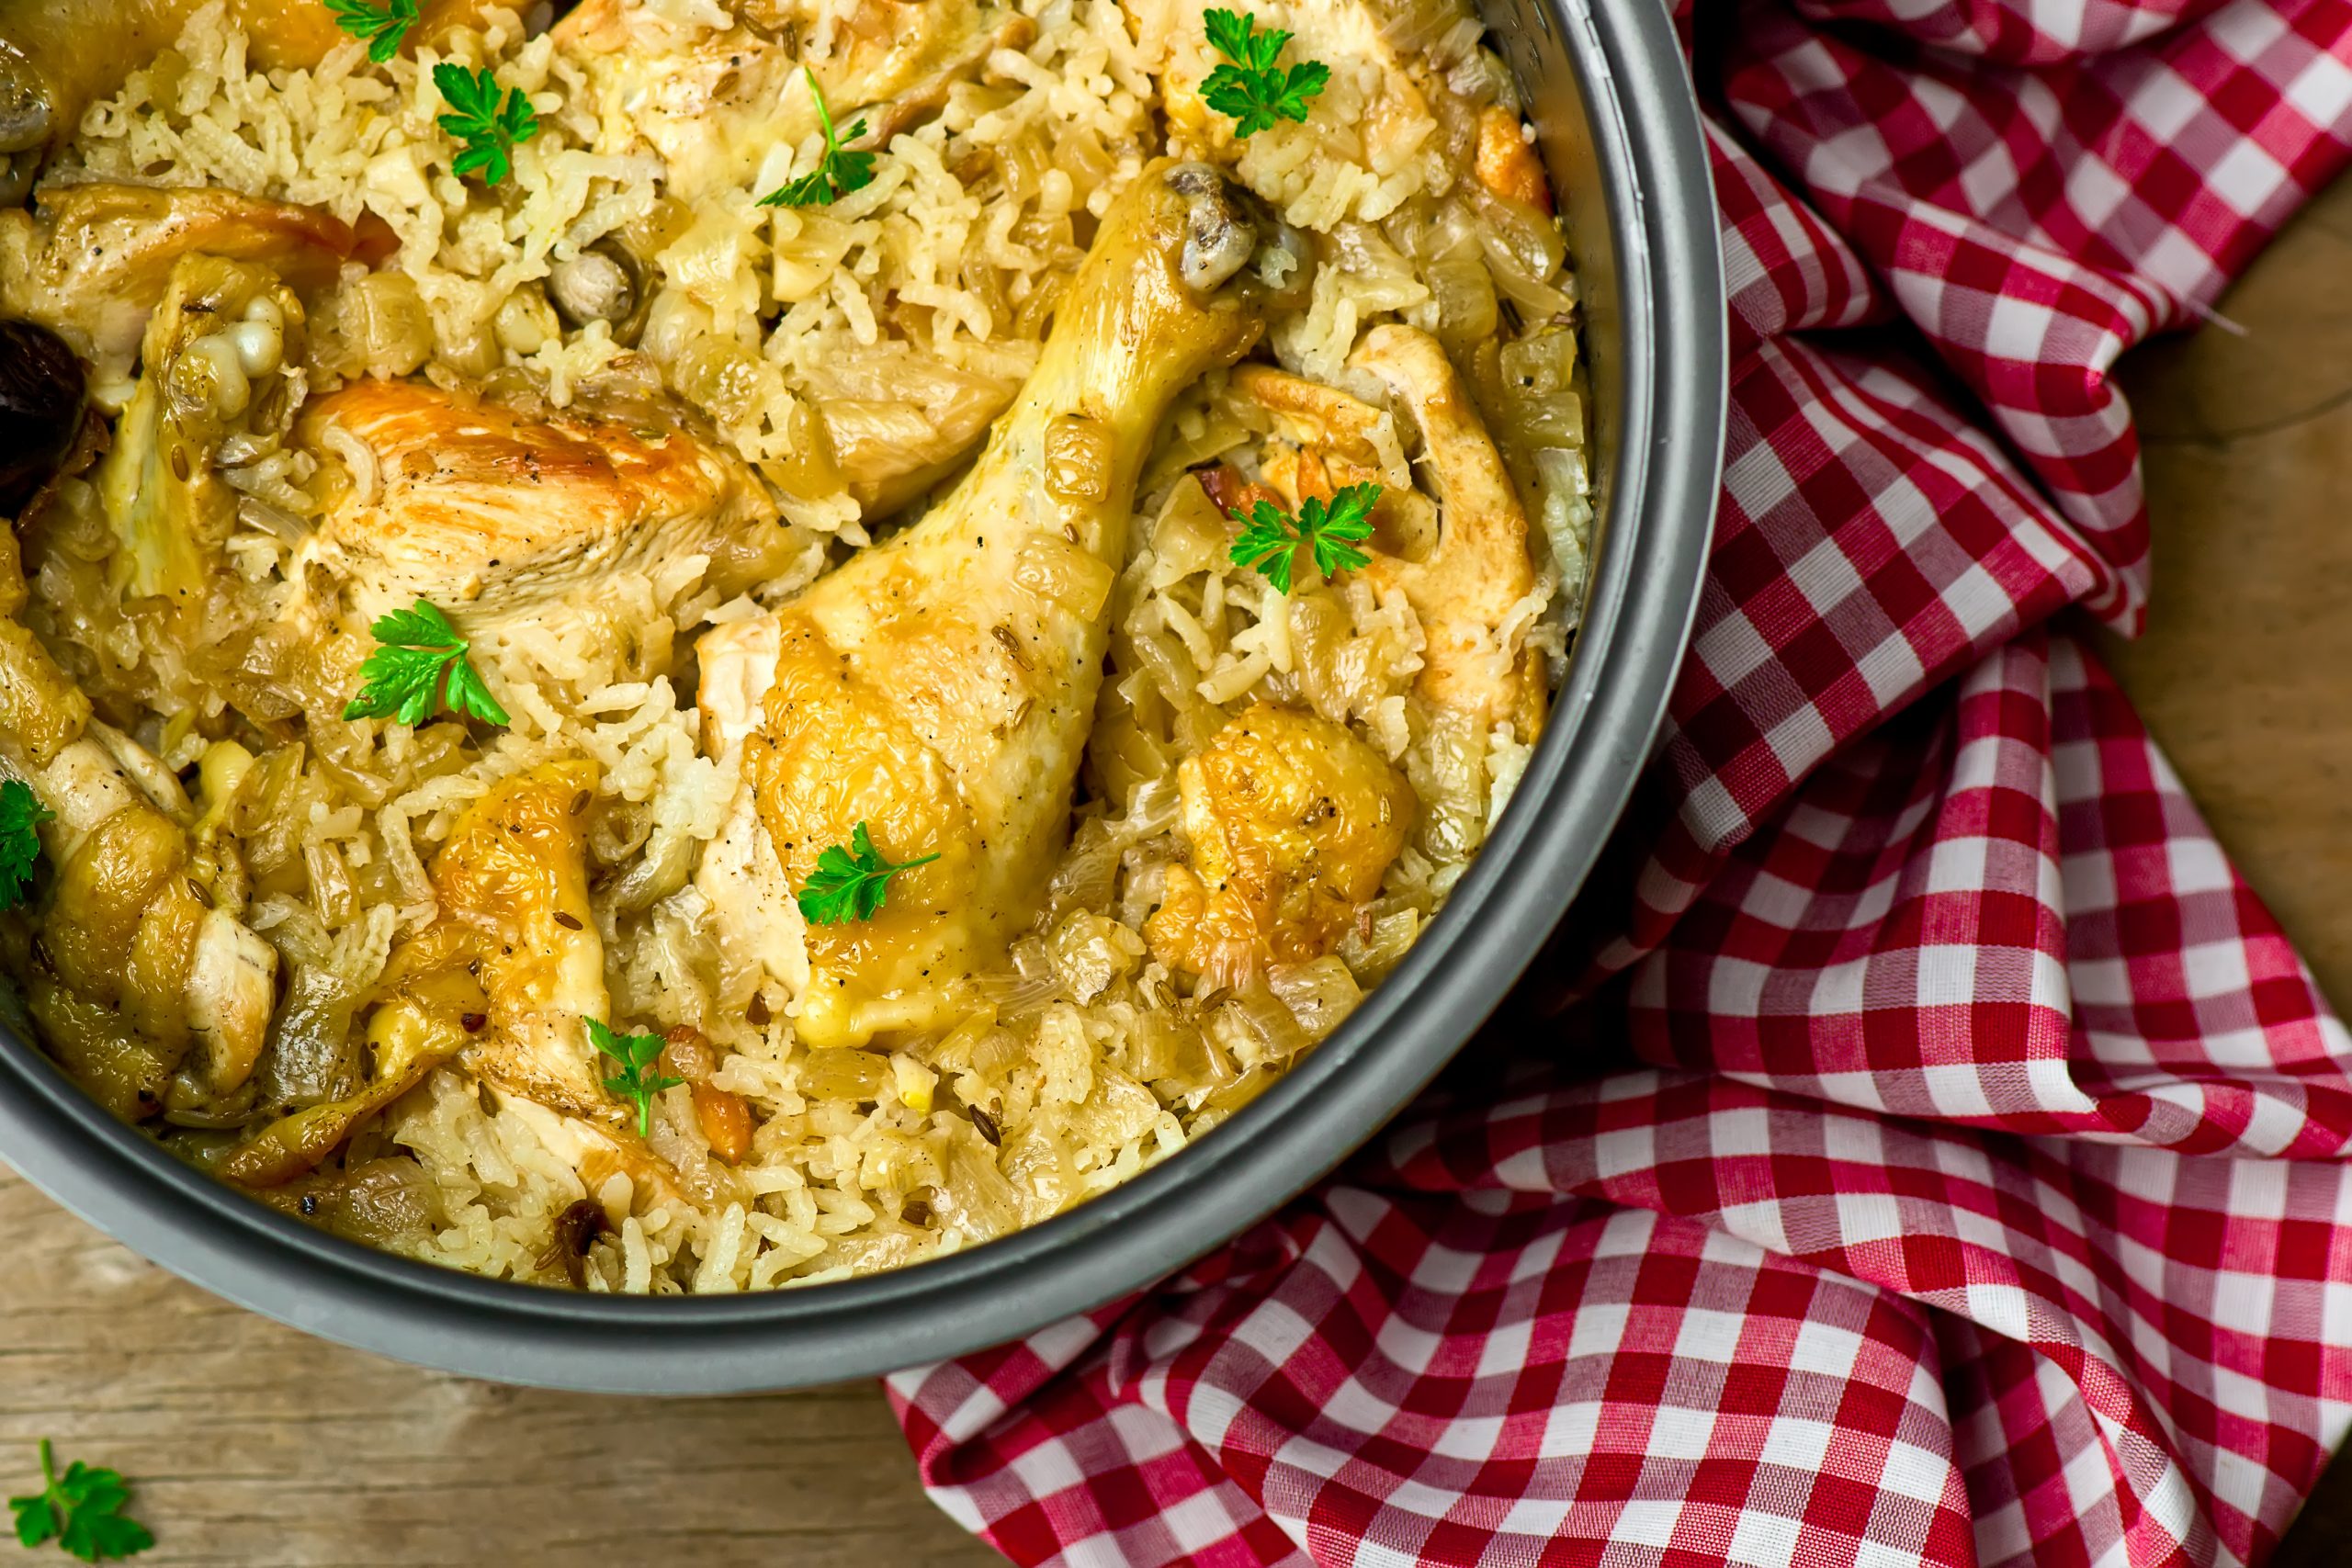 Break Out the Crockpot for this Chicken and Honey Recipe